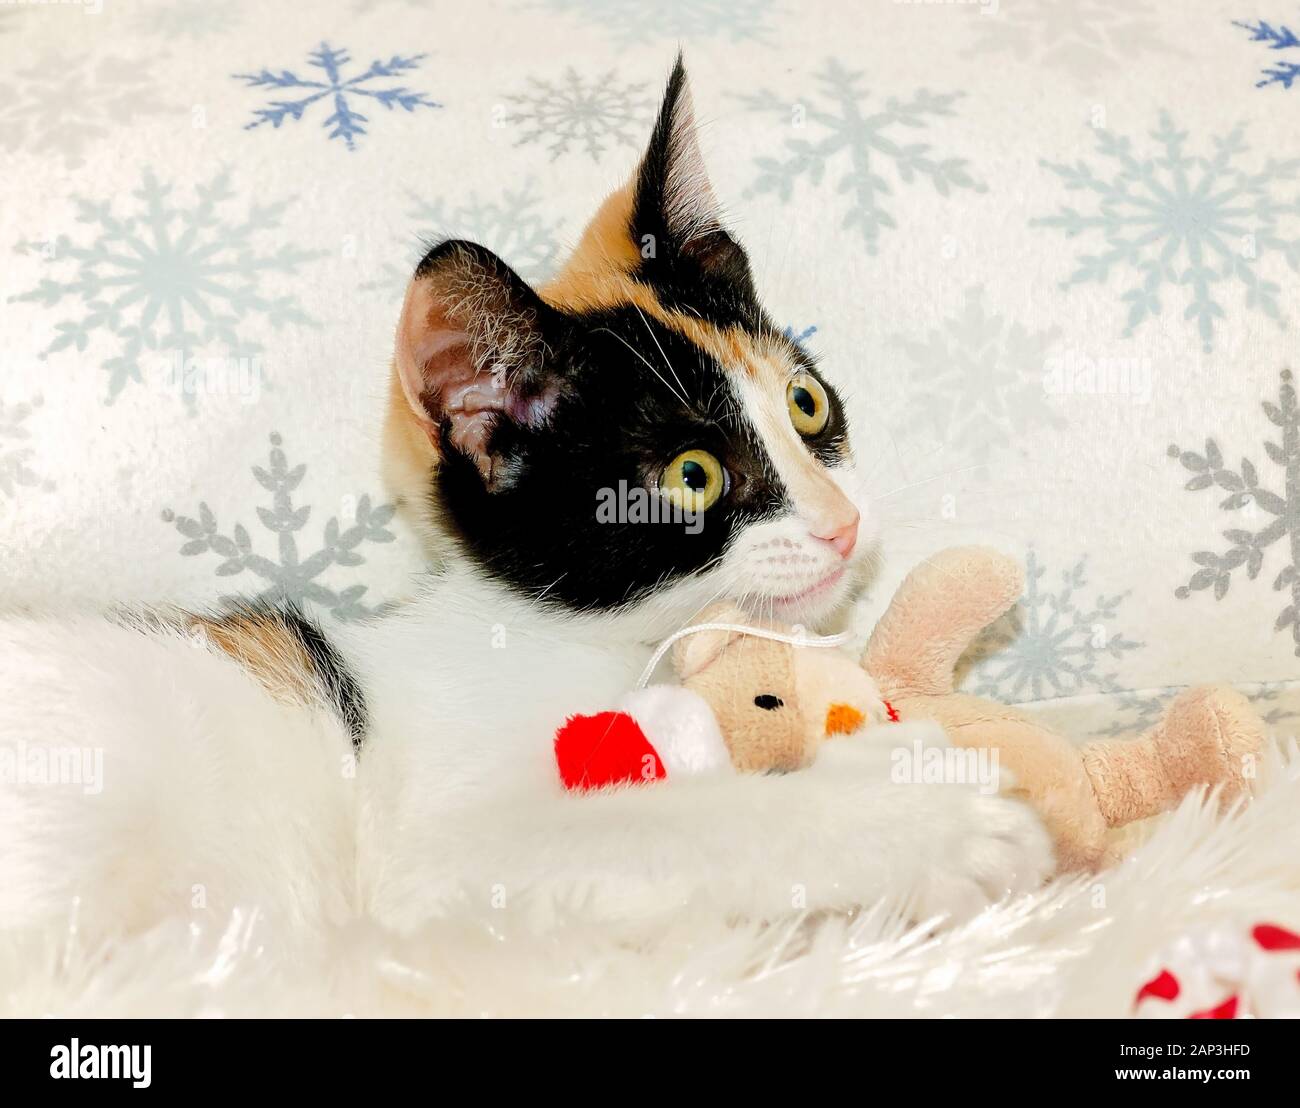 Pumpkin. a three-month-old calico kitten, plays with a plush Christmas toy, Dec. 26, 2014, in Coden, Alabama. Stock Photo